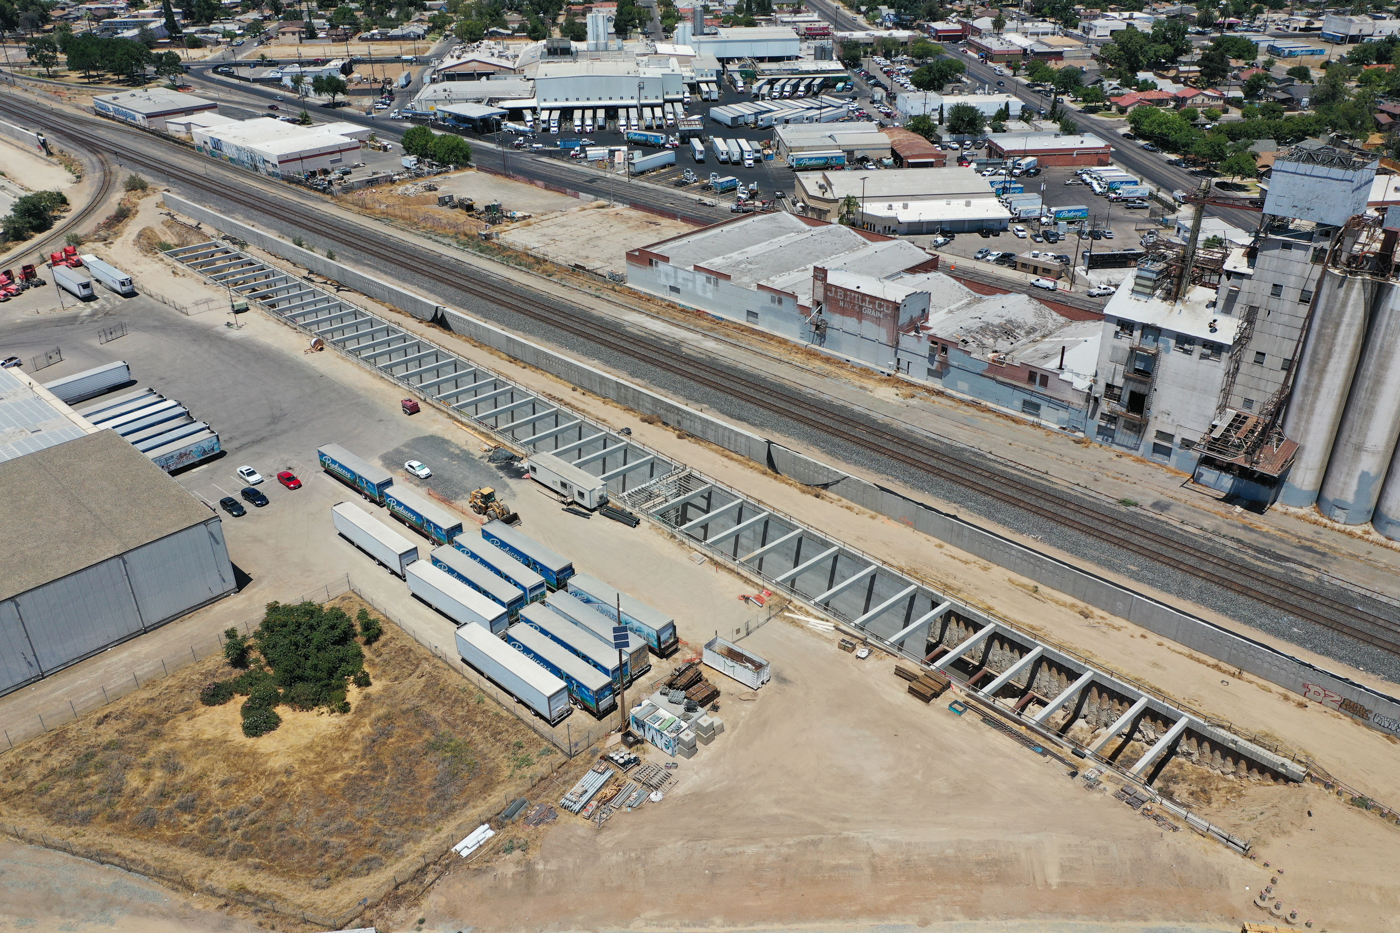 Fresno Trench & State Route 180 Passageway (drone view)